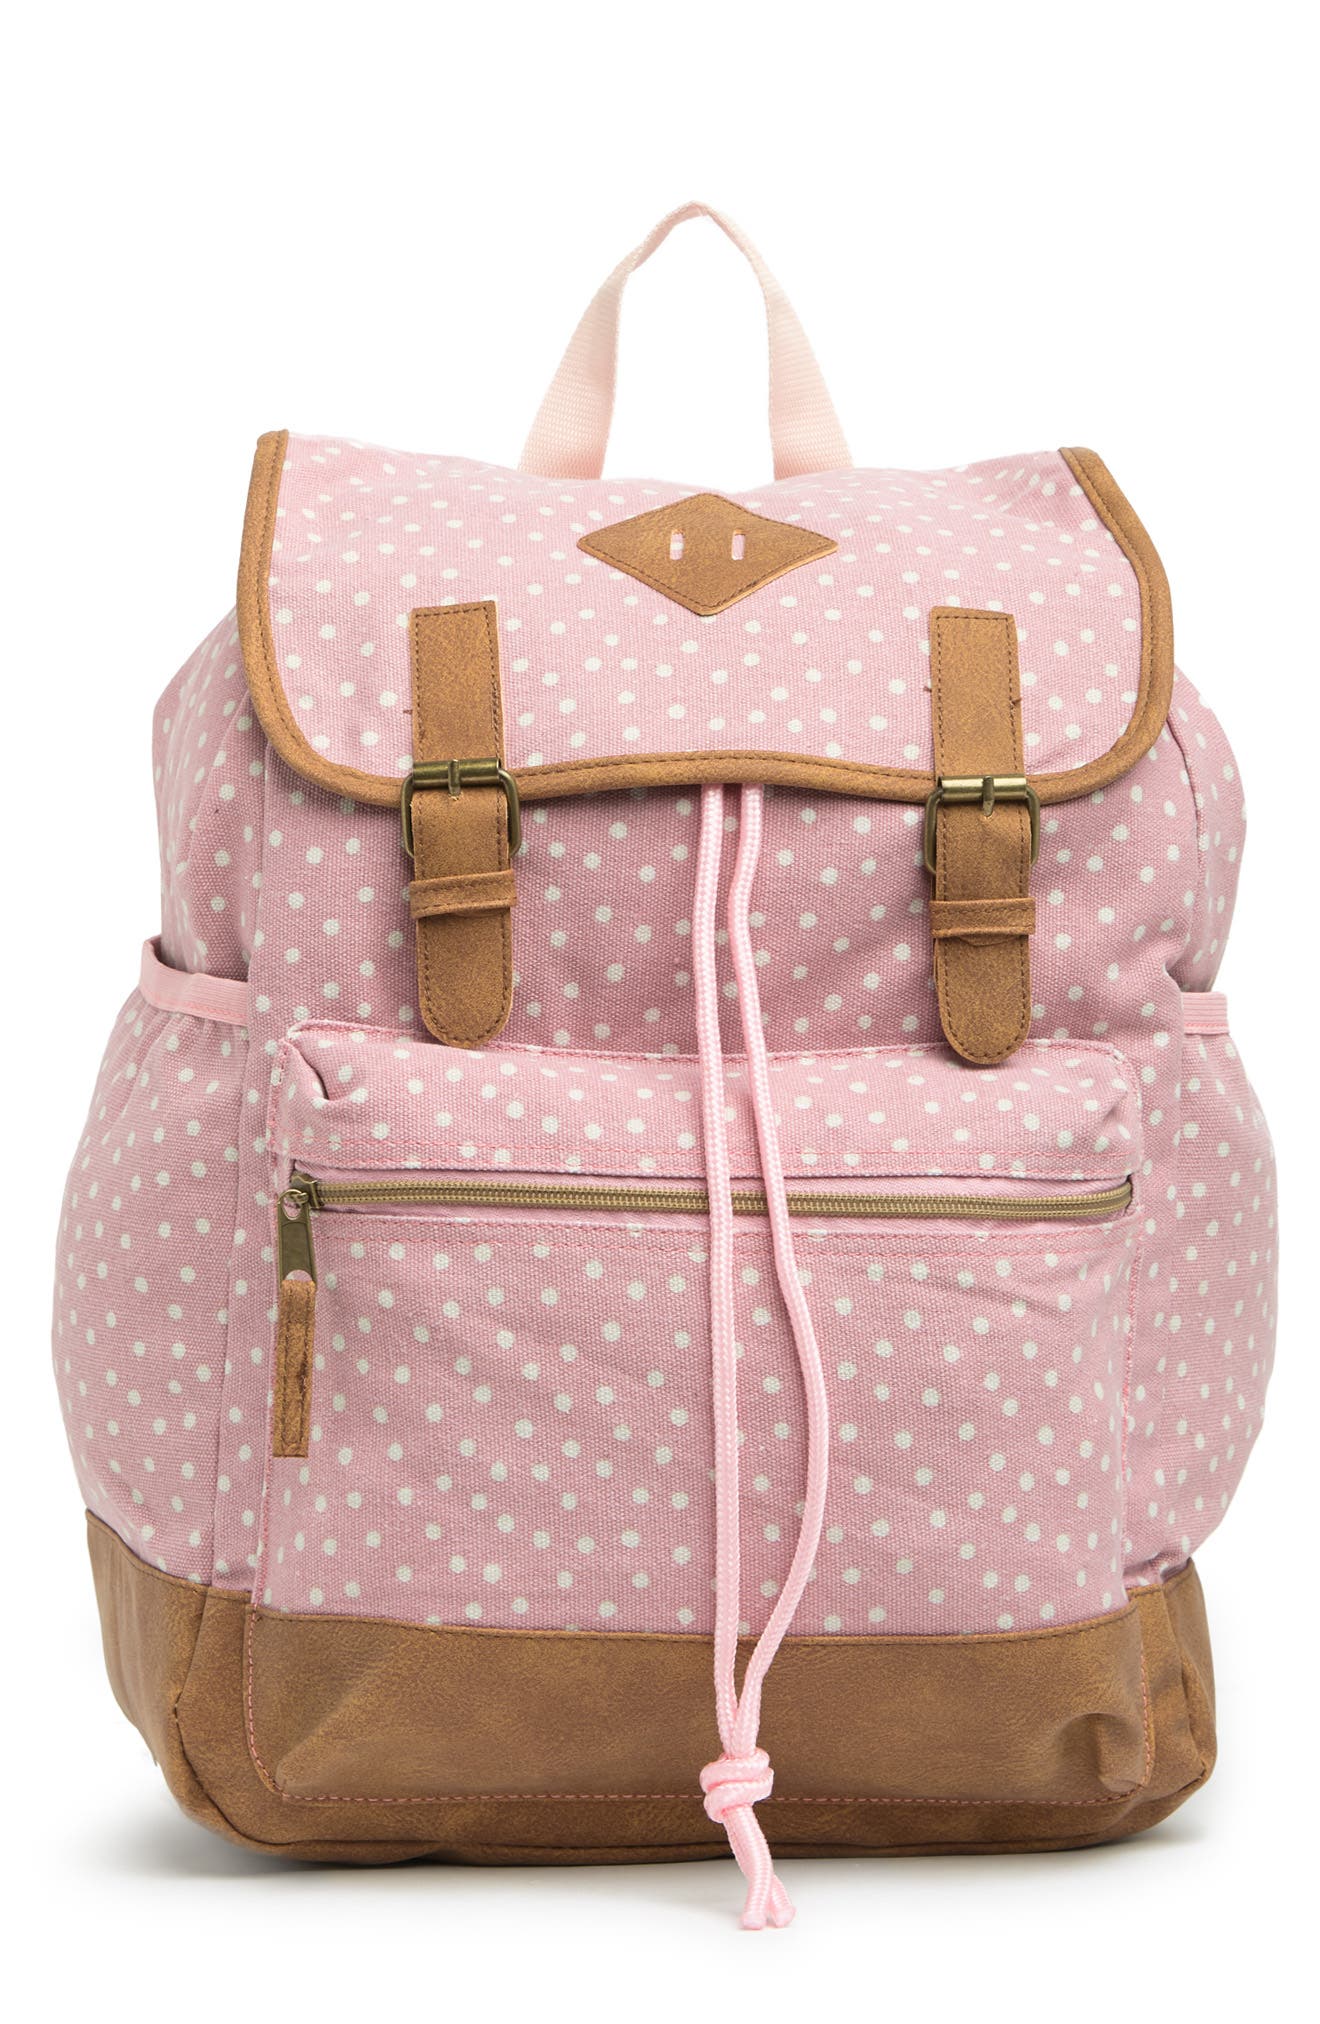 A D Sutton & Sons Kids' Polka Dot Drawstring Backpack In Pink